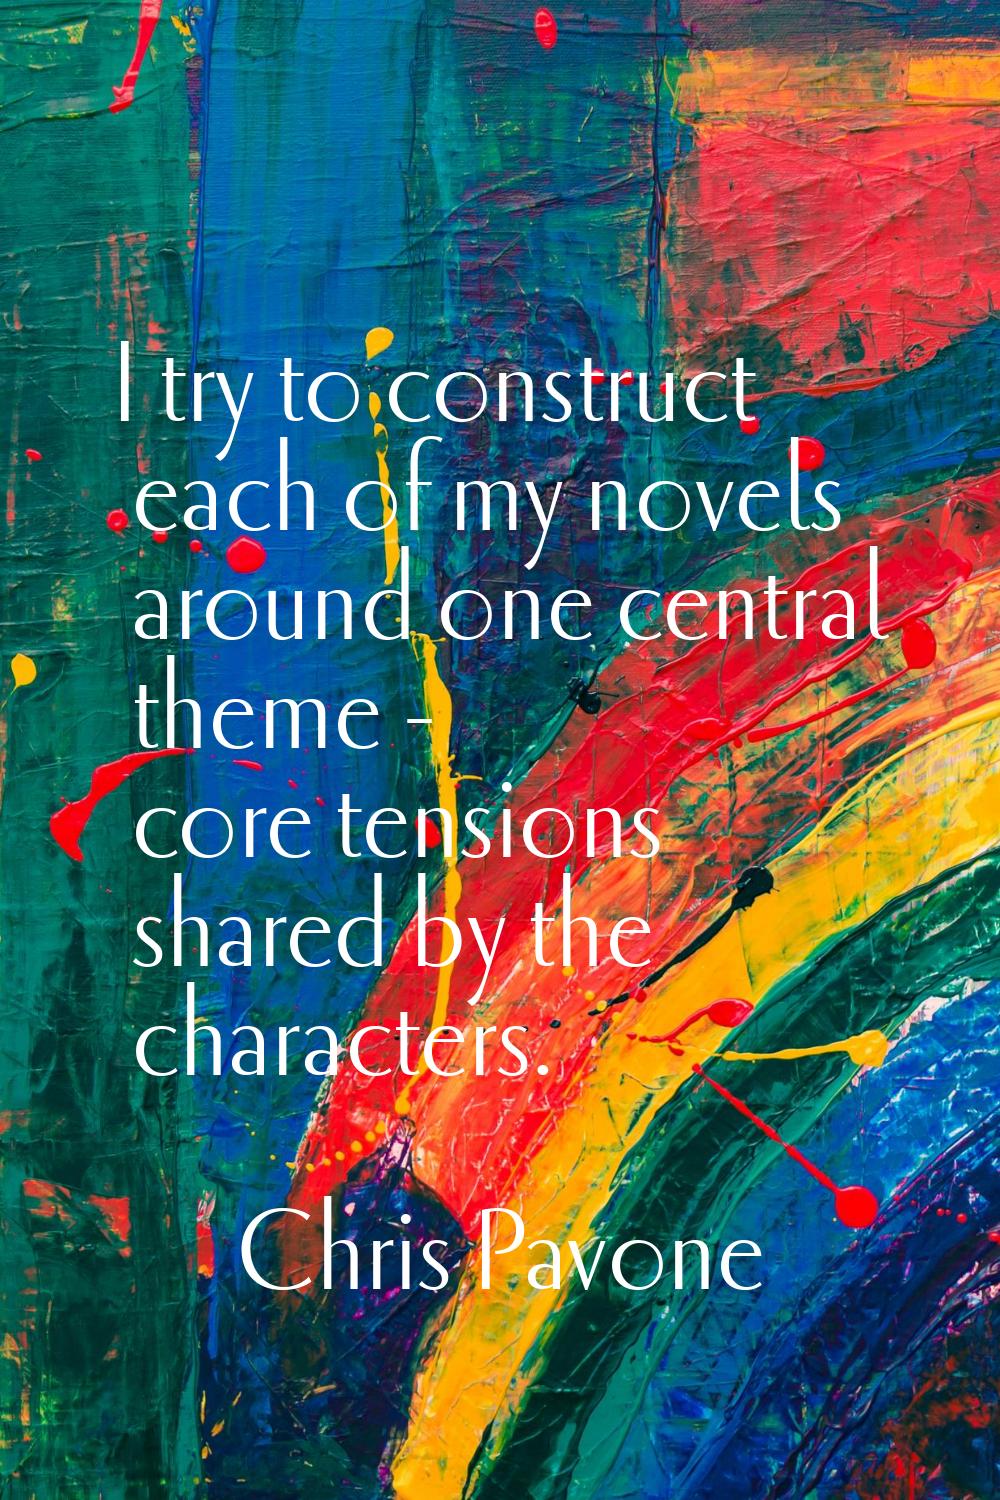 I try to construct each of my novels around one central theme - core tensions shared by the charact